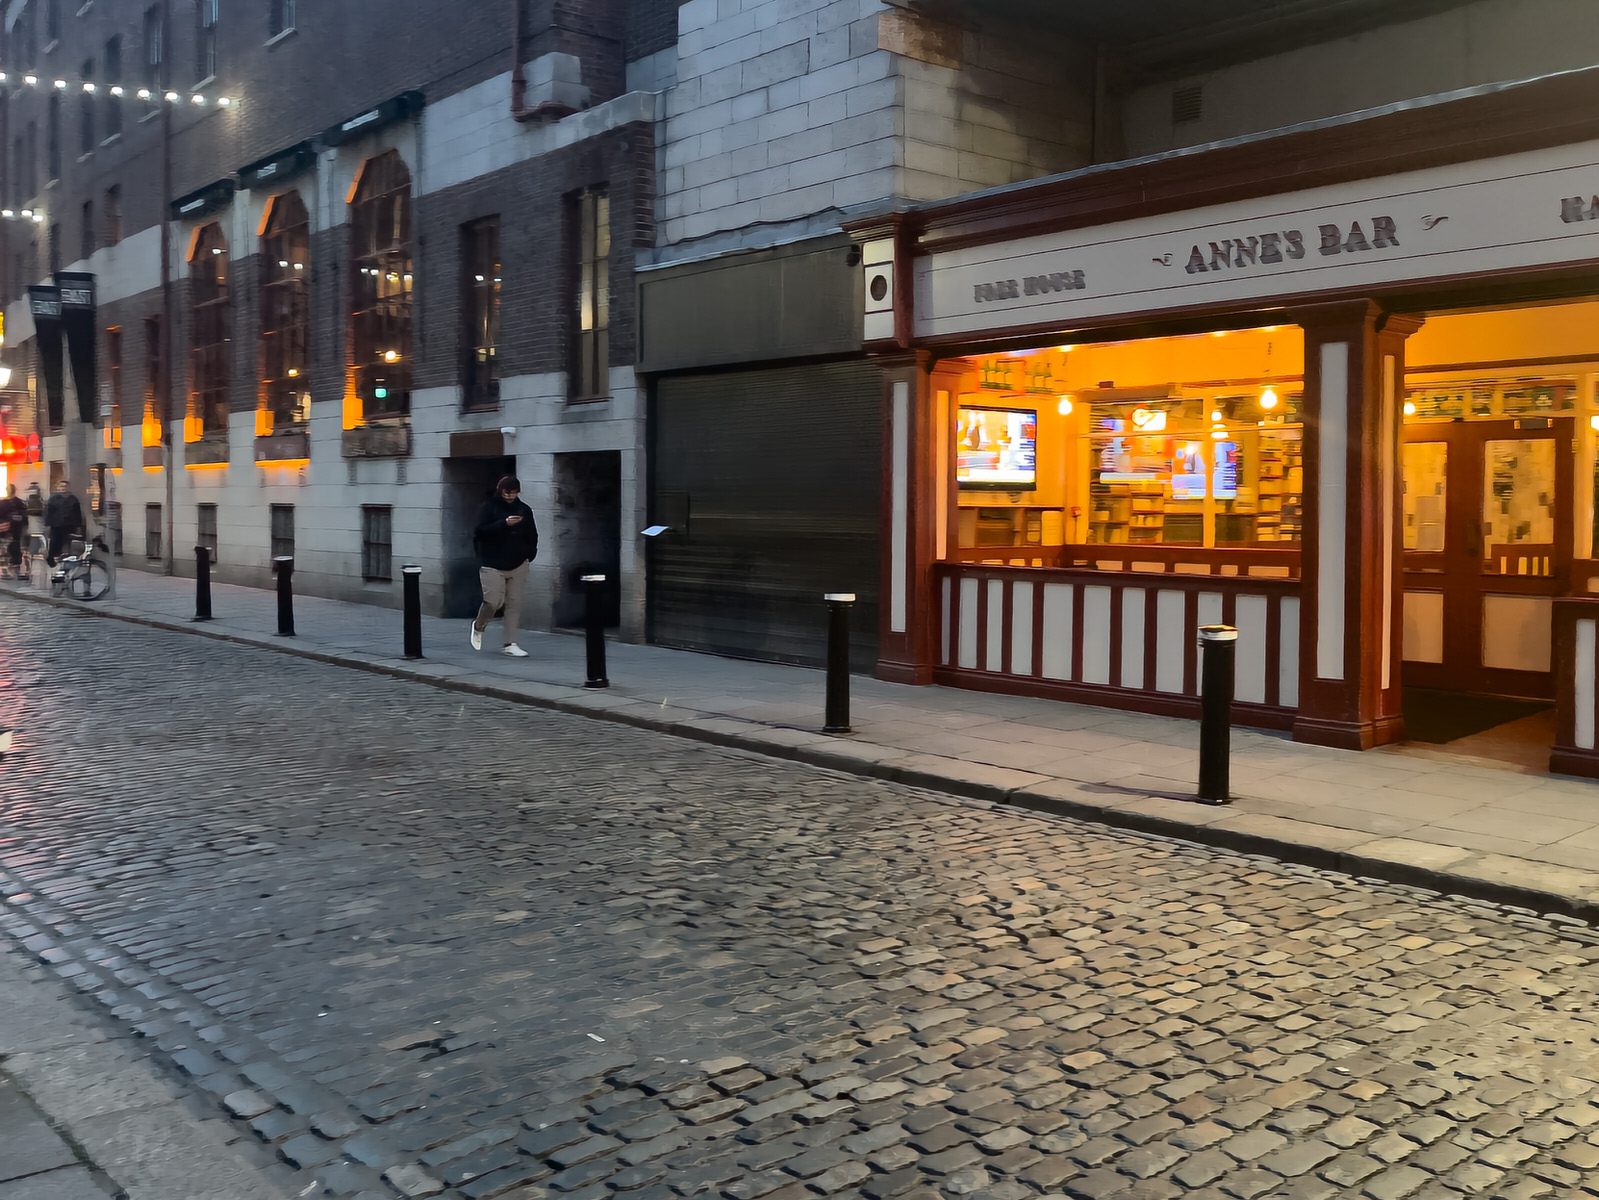 I VISITED TEMPLE BAR TODAY [AS NIGHTFALL WAS APPROACHING]-225370-1